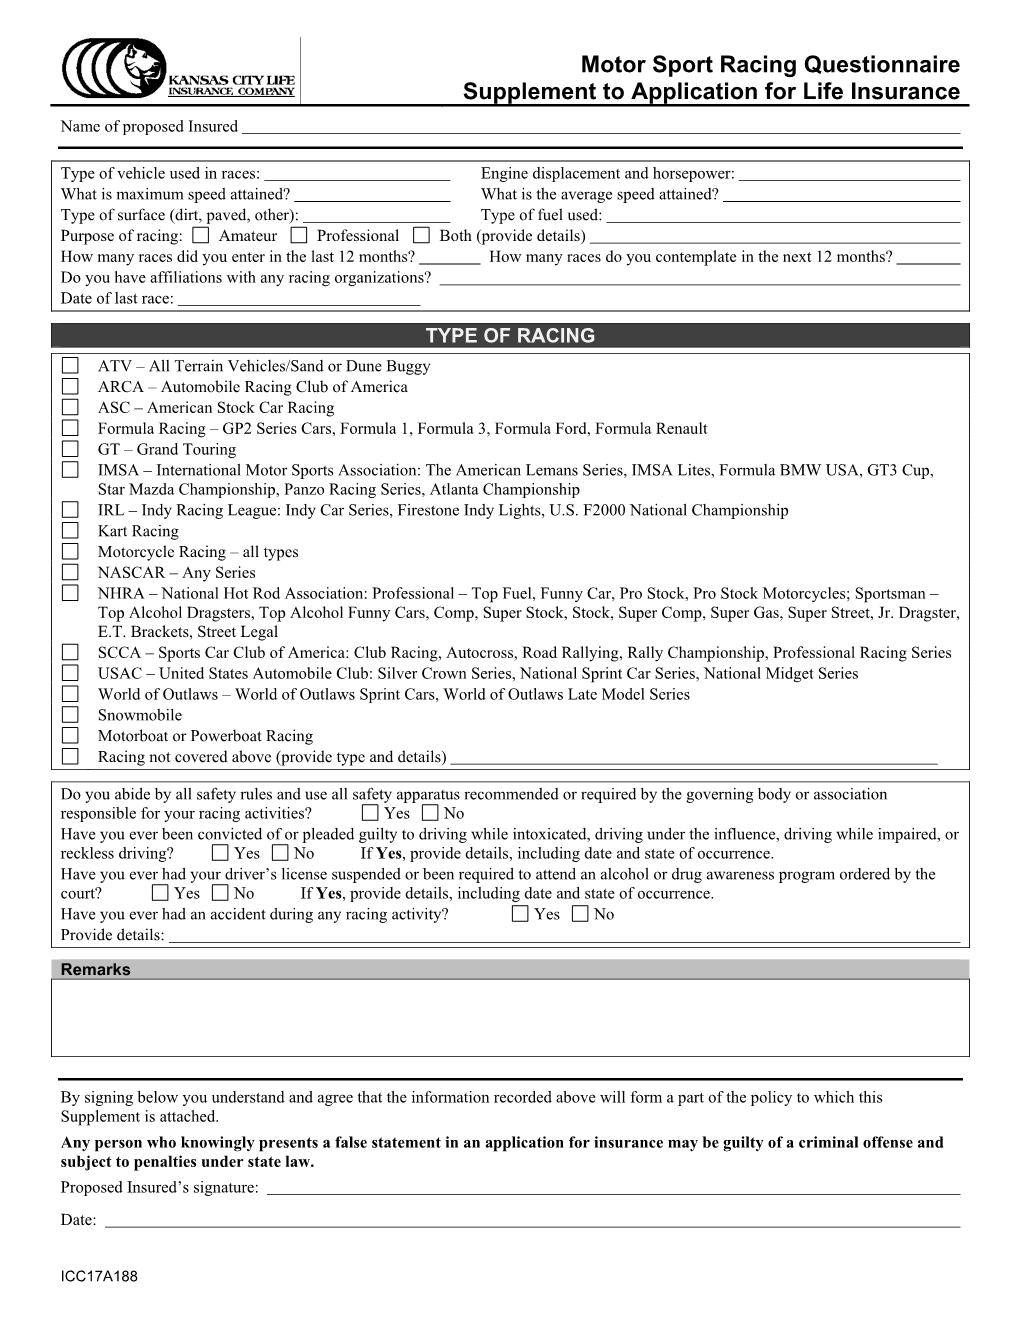 Motor Sport Racing Questionnaire Supplement to Application for Life Insurance